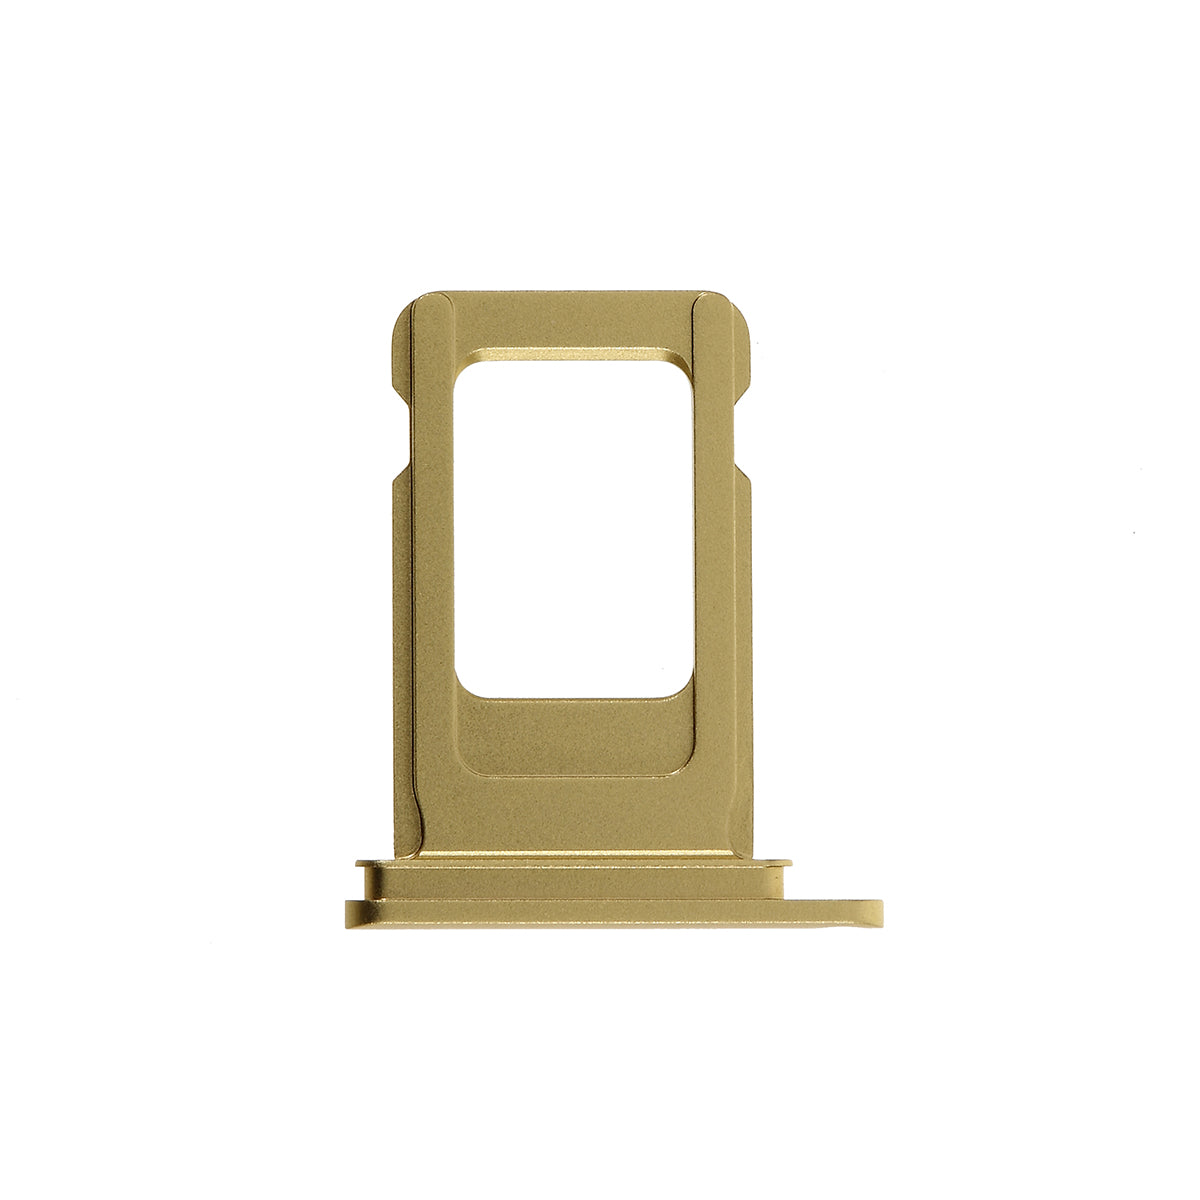 OEM SIM Card Tray Holder Replace Part for Apple iPhone 11 6.1 inch - Yellow